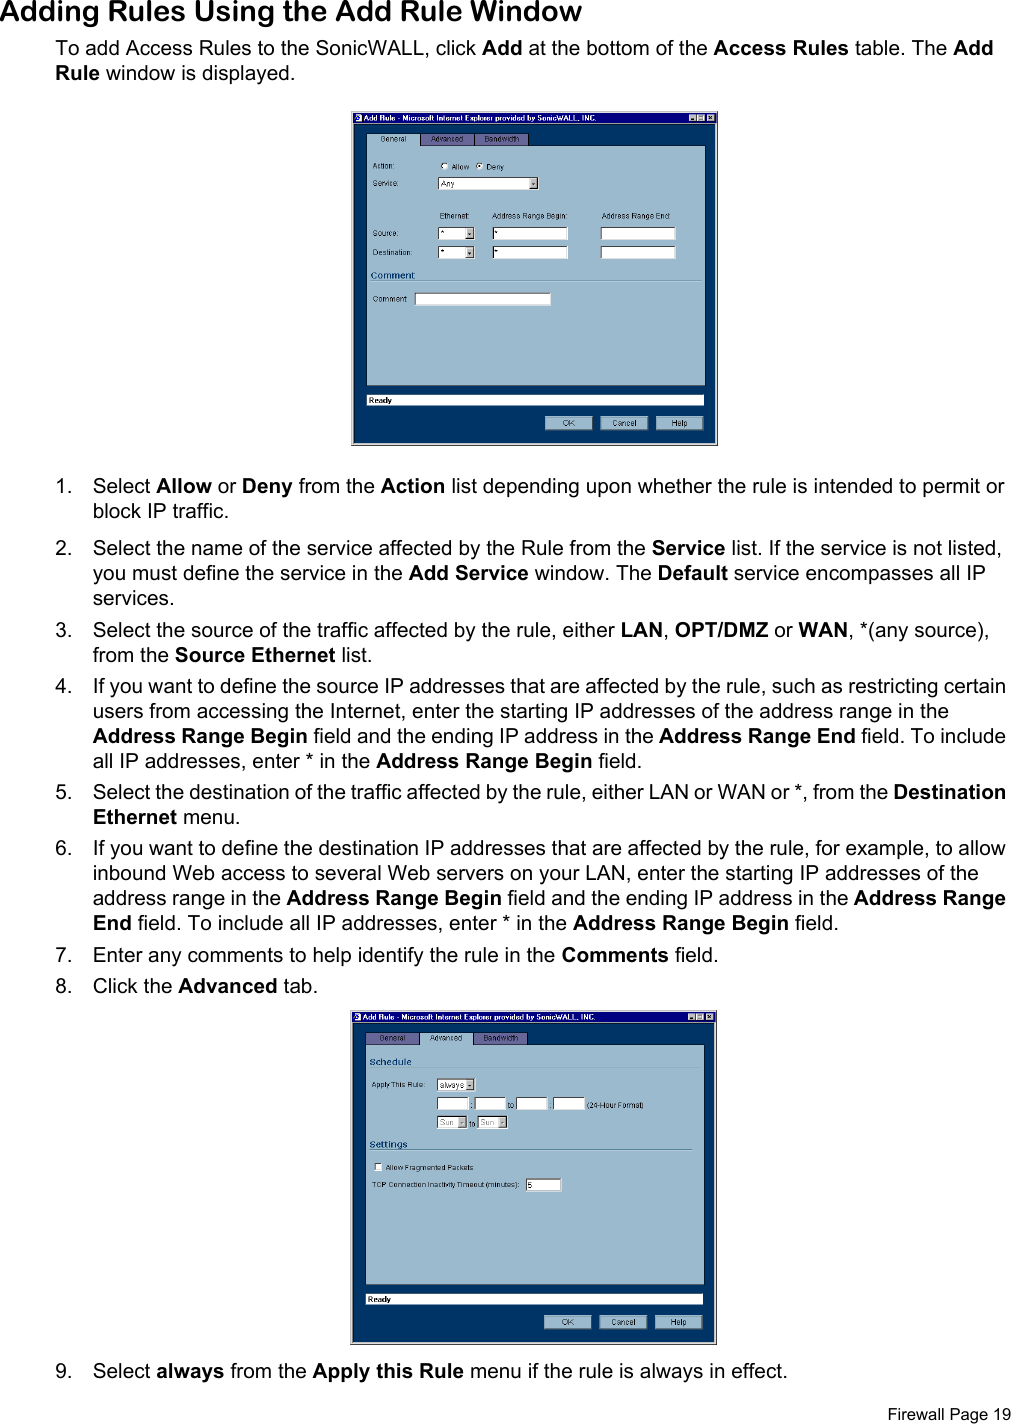  Firewall Page 19Adding Rules Using the Add Rule WindowTo add Access Rules to the SonicWALL, click Add at the bottom of the Access Rules table. The Add Rule window is displayed. 1. Select Allow or Deny from the Action list depending upon whether the rule is intended to permit or block IP traffic.2. Select the name of the service affected by the Rule from the Service list. If the service is not listed, you must define the service in the Add Service window. The Default service encompasses all IP services.3. Select the source of the traffic affected by the rule, either LAN, OPT/DMZ or WAN, *(any source), from the Source Ethernet list. 4. If you want to define the source IP addresses that are affected by the rule, such as restricting certain users from accessing the Internet, enter the starting IP addresses of the address range in the Address Range Begin field and the ending IP address in the Address Range End field. To include all IP addresses, enter * in the Address Range Begin field.5. Select the destination of the traffic affected by the rule, either LAN or WAN or *, from the Destination Ethernet menu. 6. If you want to define the destination IP addresses that are affected by the rule, for example, to allow inbound Web access to several Web servers on your LAN, enter the starting IP addresses of the address range in the Address Range Begin field and the ending IP address in the Address Range End field. To include all IP addresses, enter * in the Address Range Begin field.7. Enter any comments to help identify the rule in the Comments field. 8. Click the Advanced tab.9. Select always from the Apply this Rule menu if the rule is always in effect. 